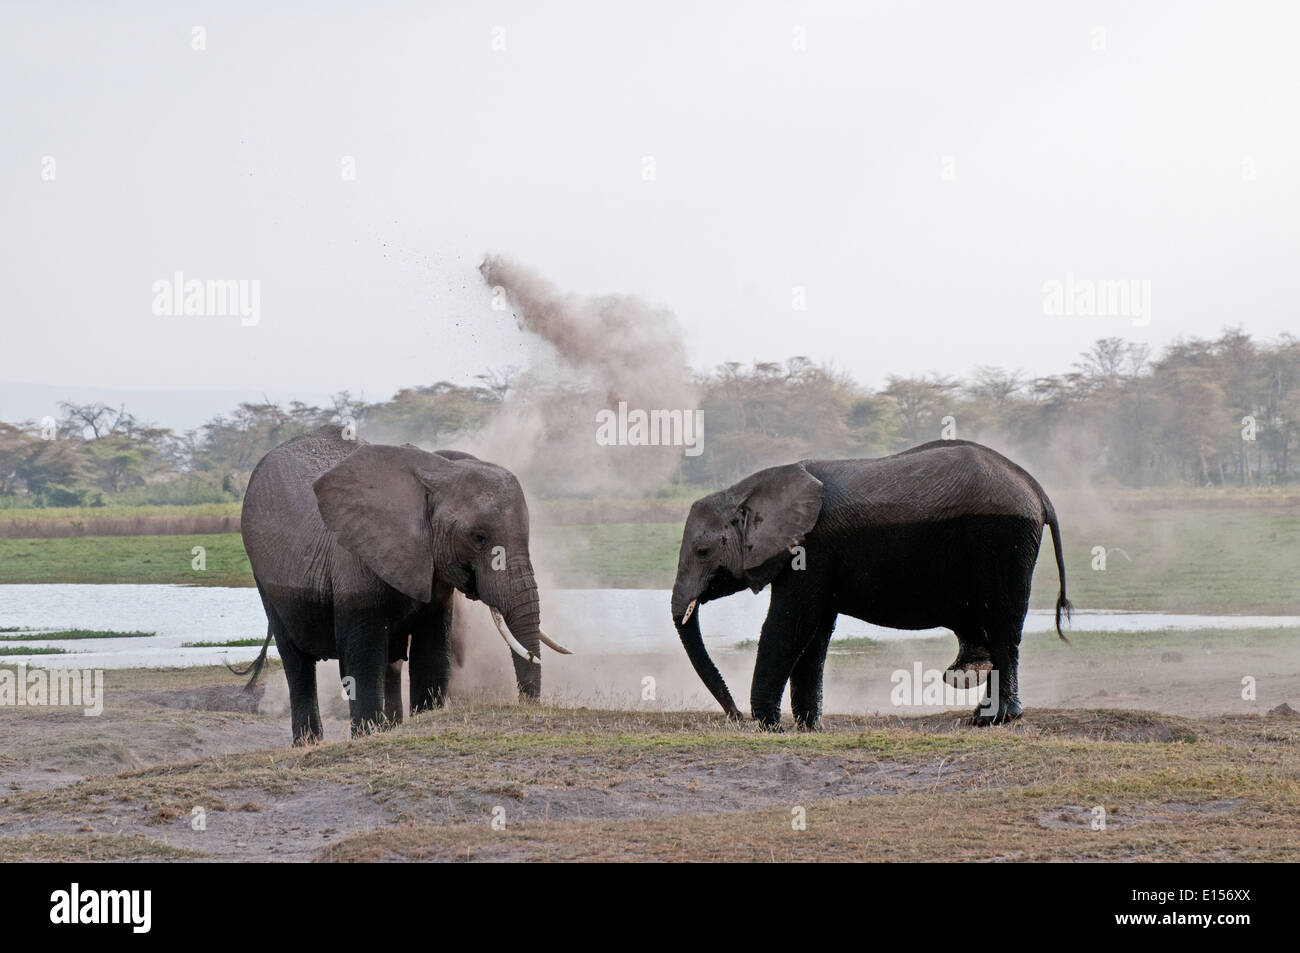 Elephants blowing dust over themselves in Amboseli National Park Kenya Stock Photo